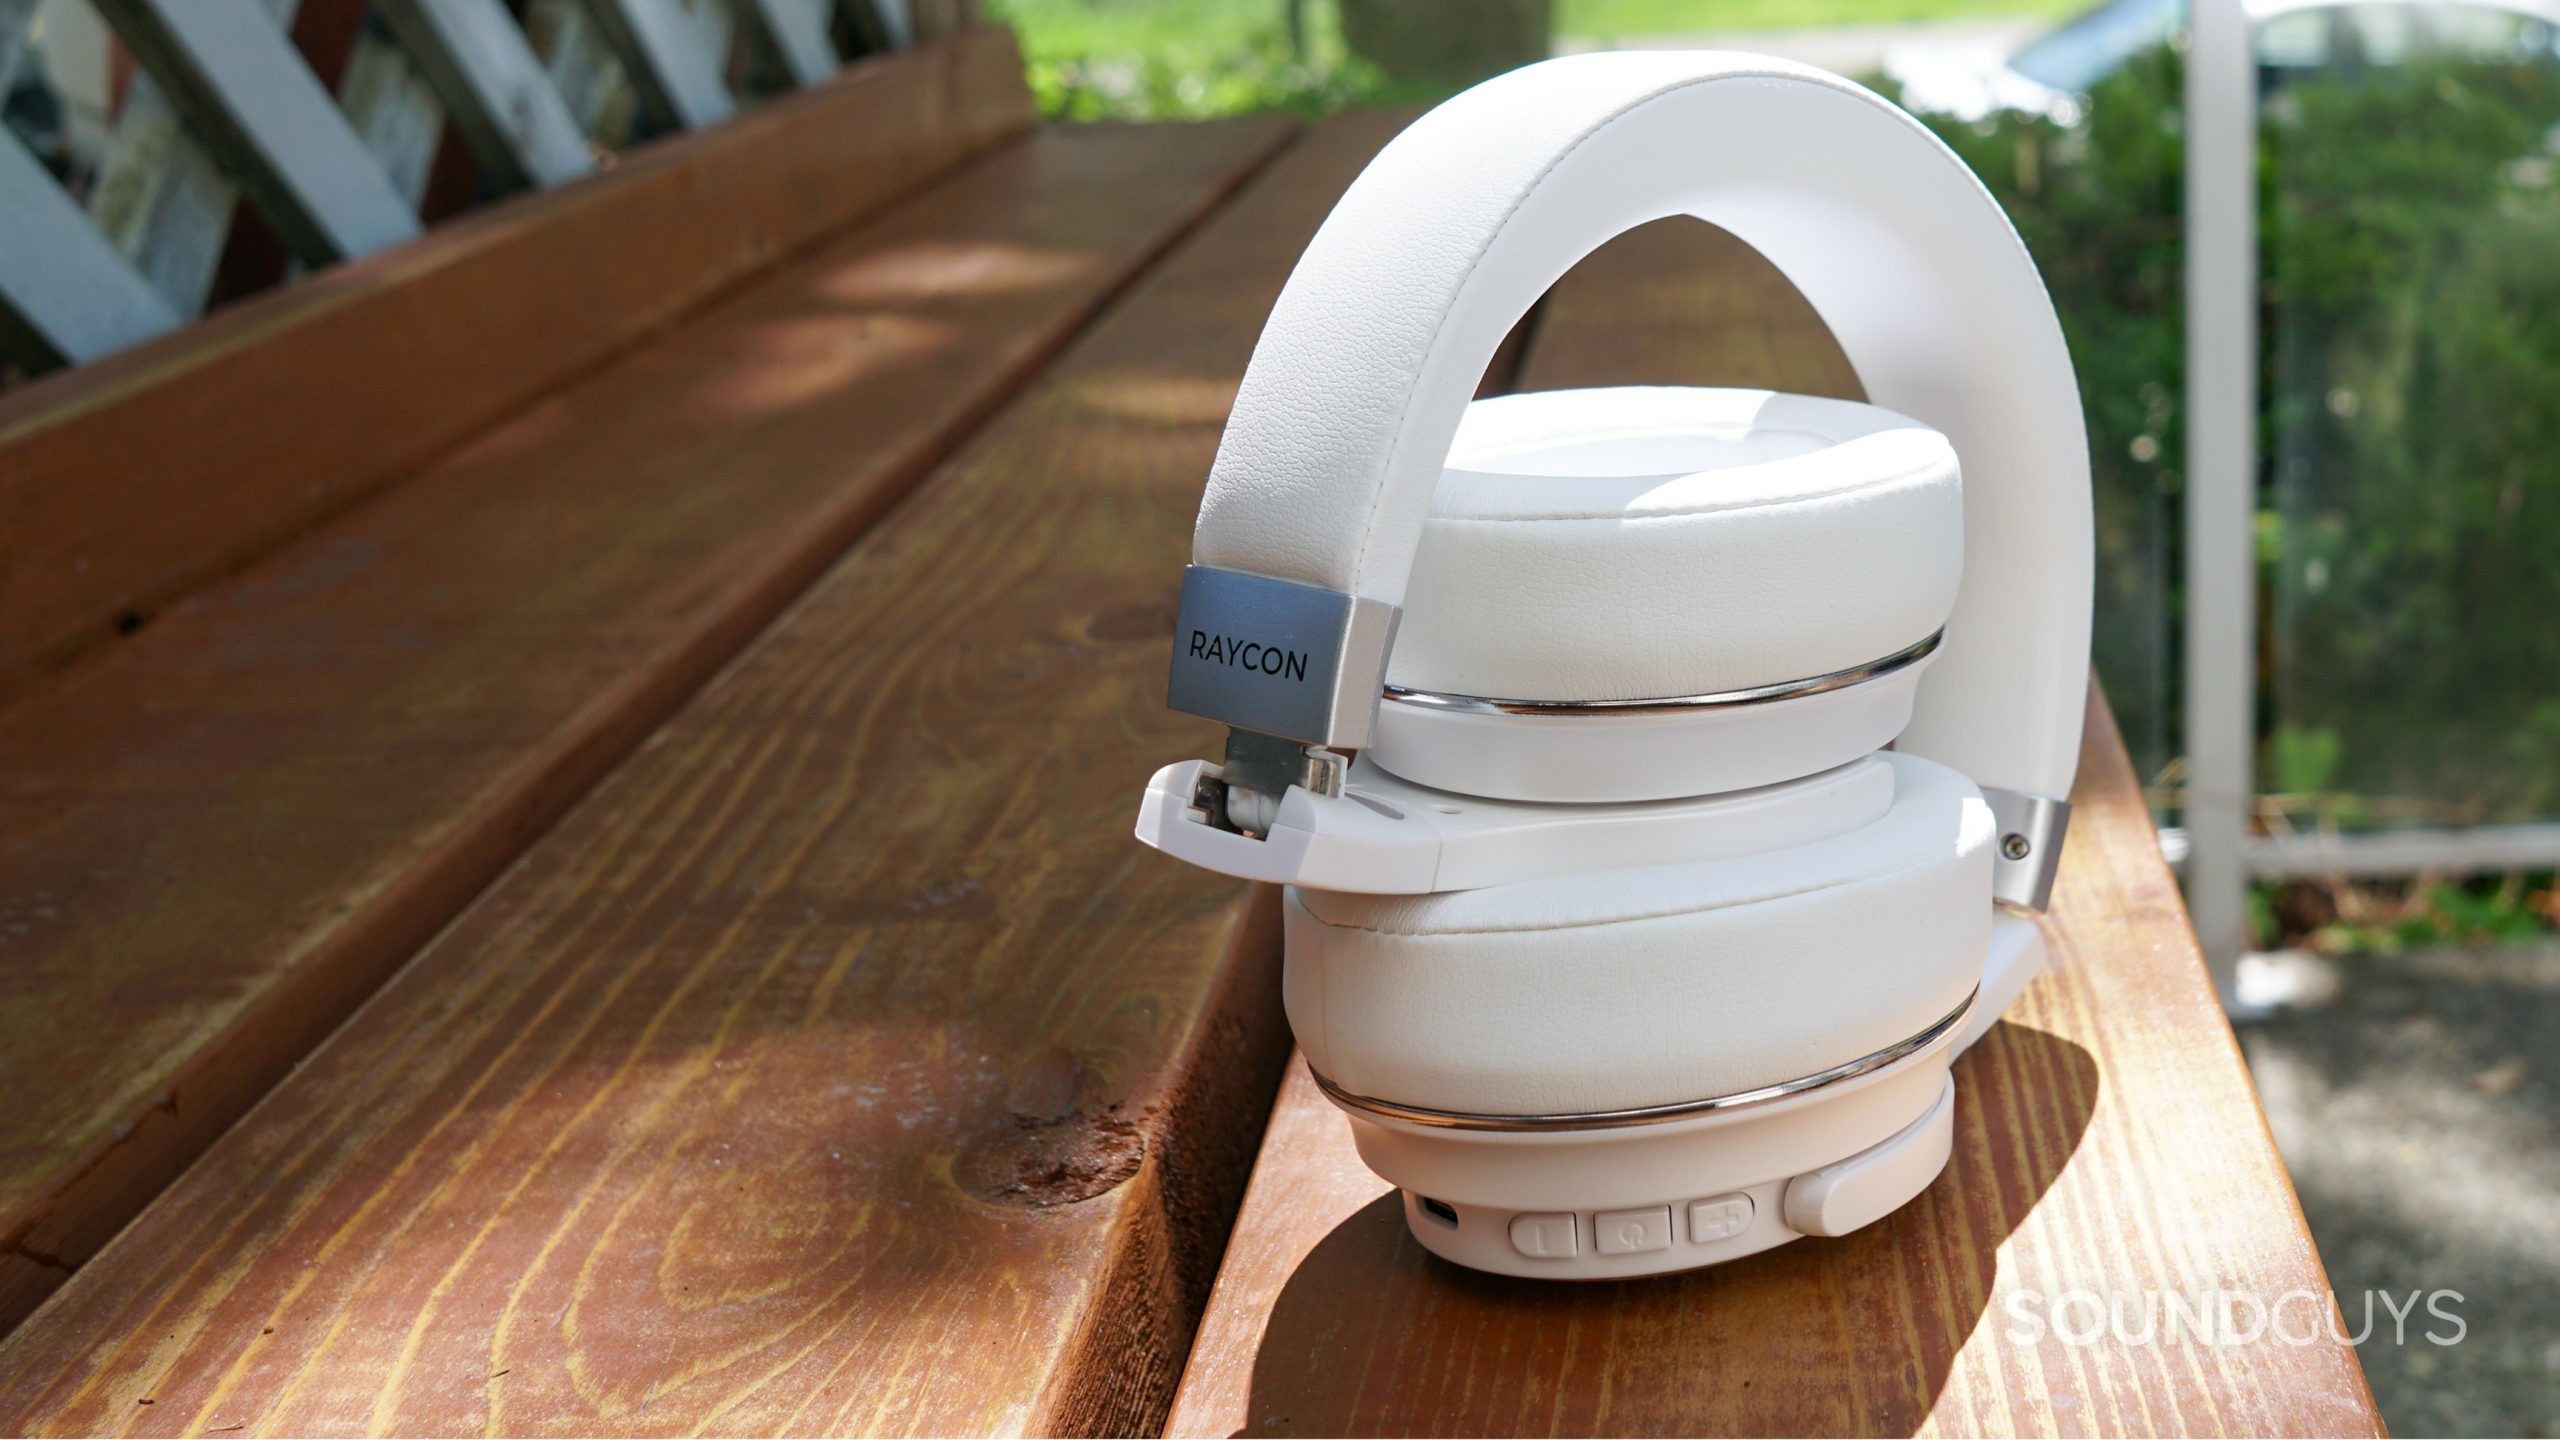 The Raycon Everyday Headphones sit folded up on a wooden surface.